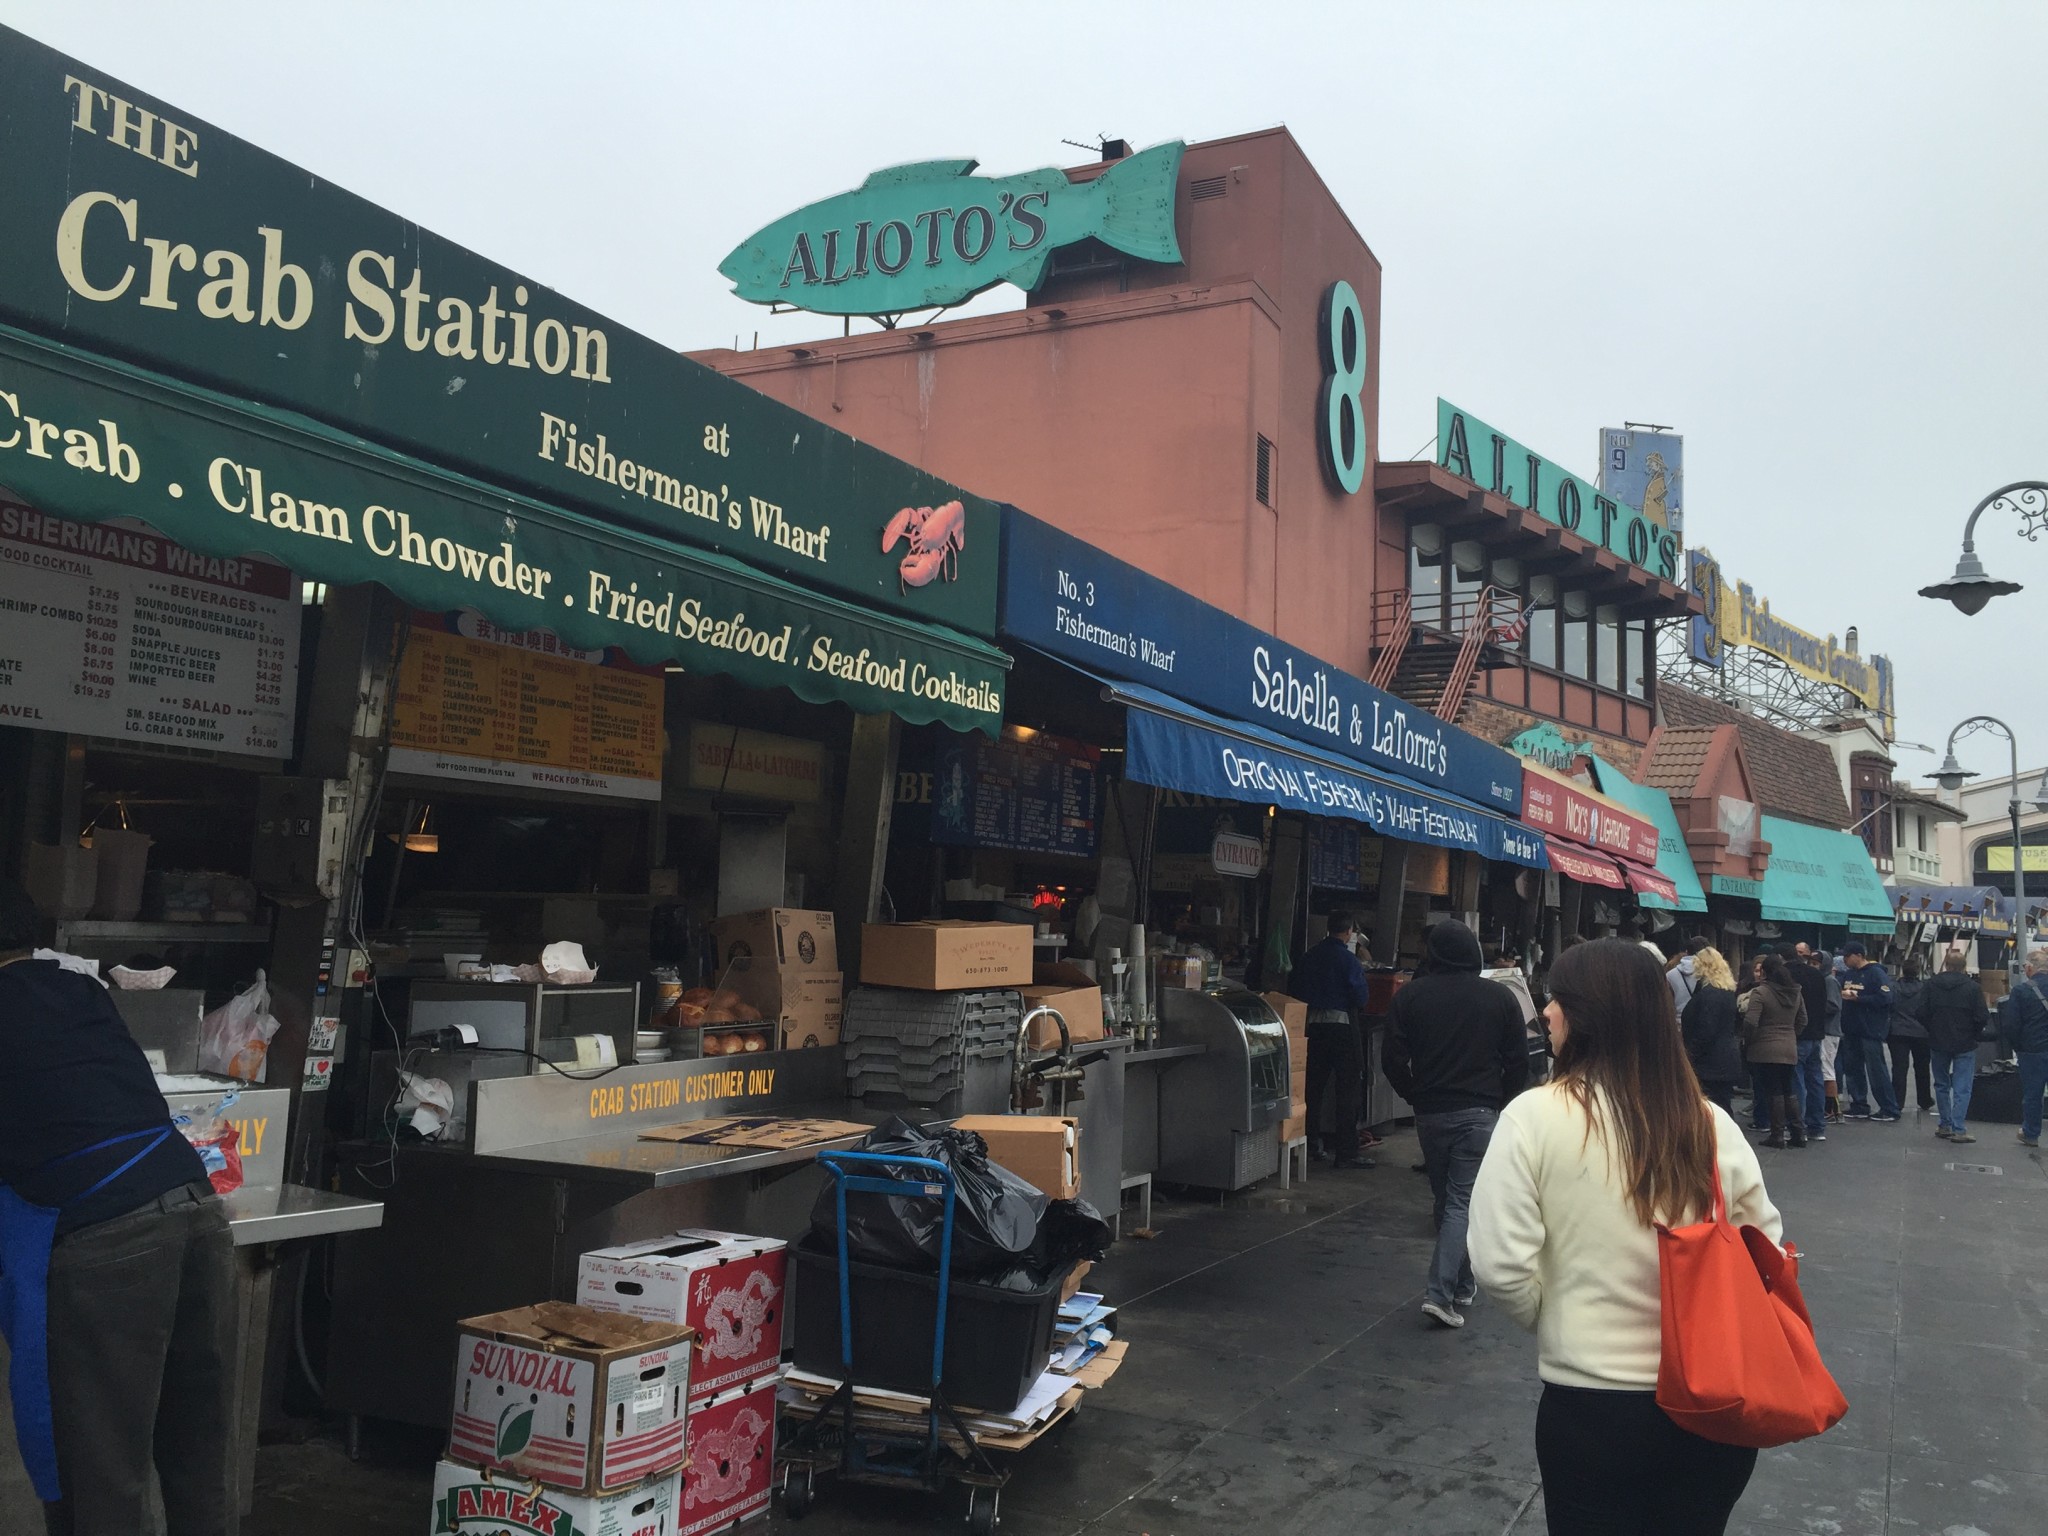 10 Things to Do at FISHERMANs WHARF and PIER 39, San Francisco